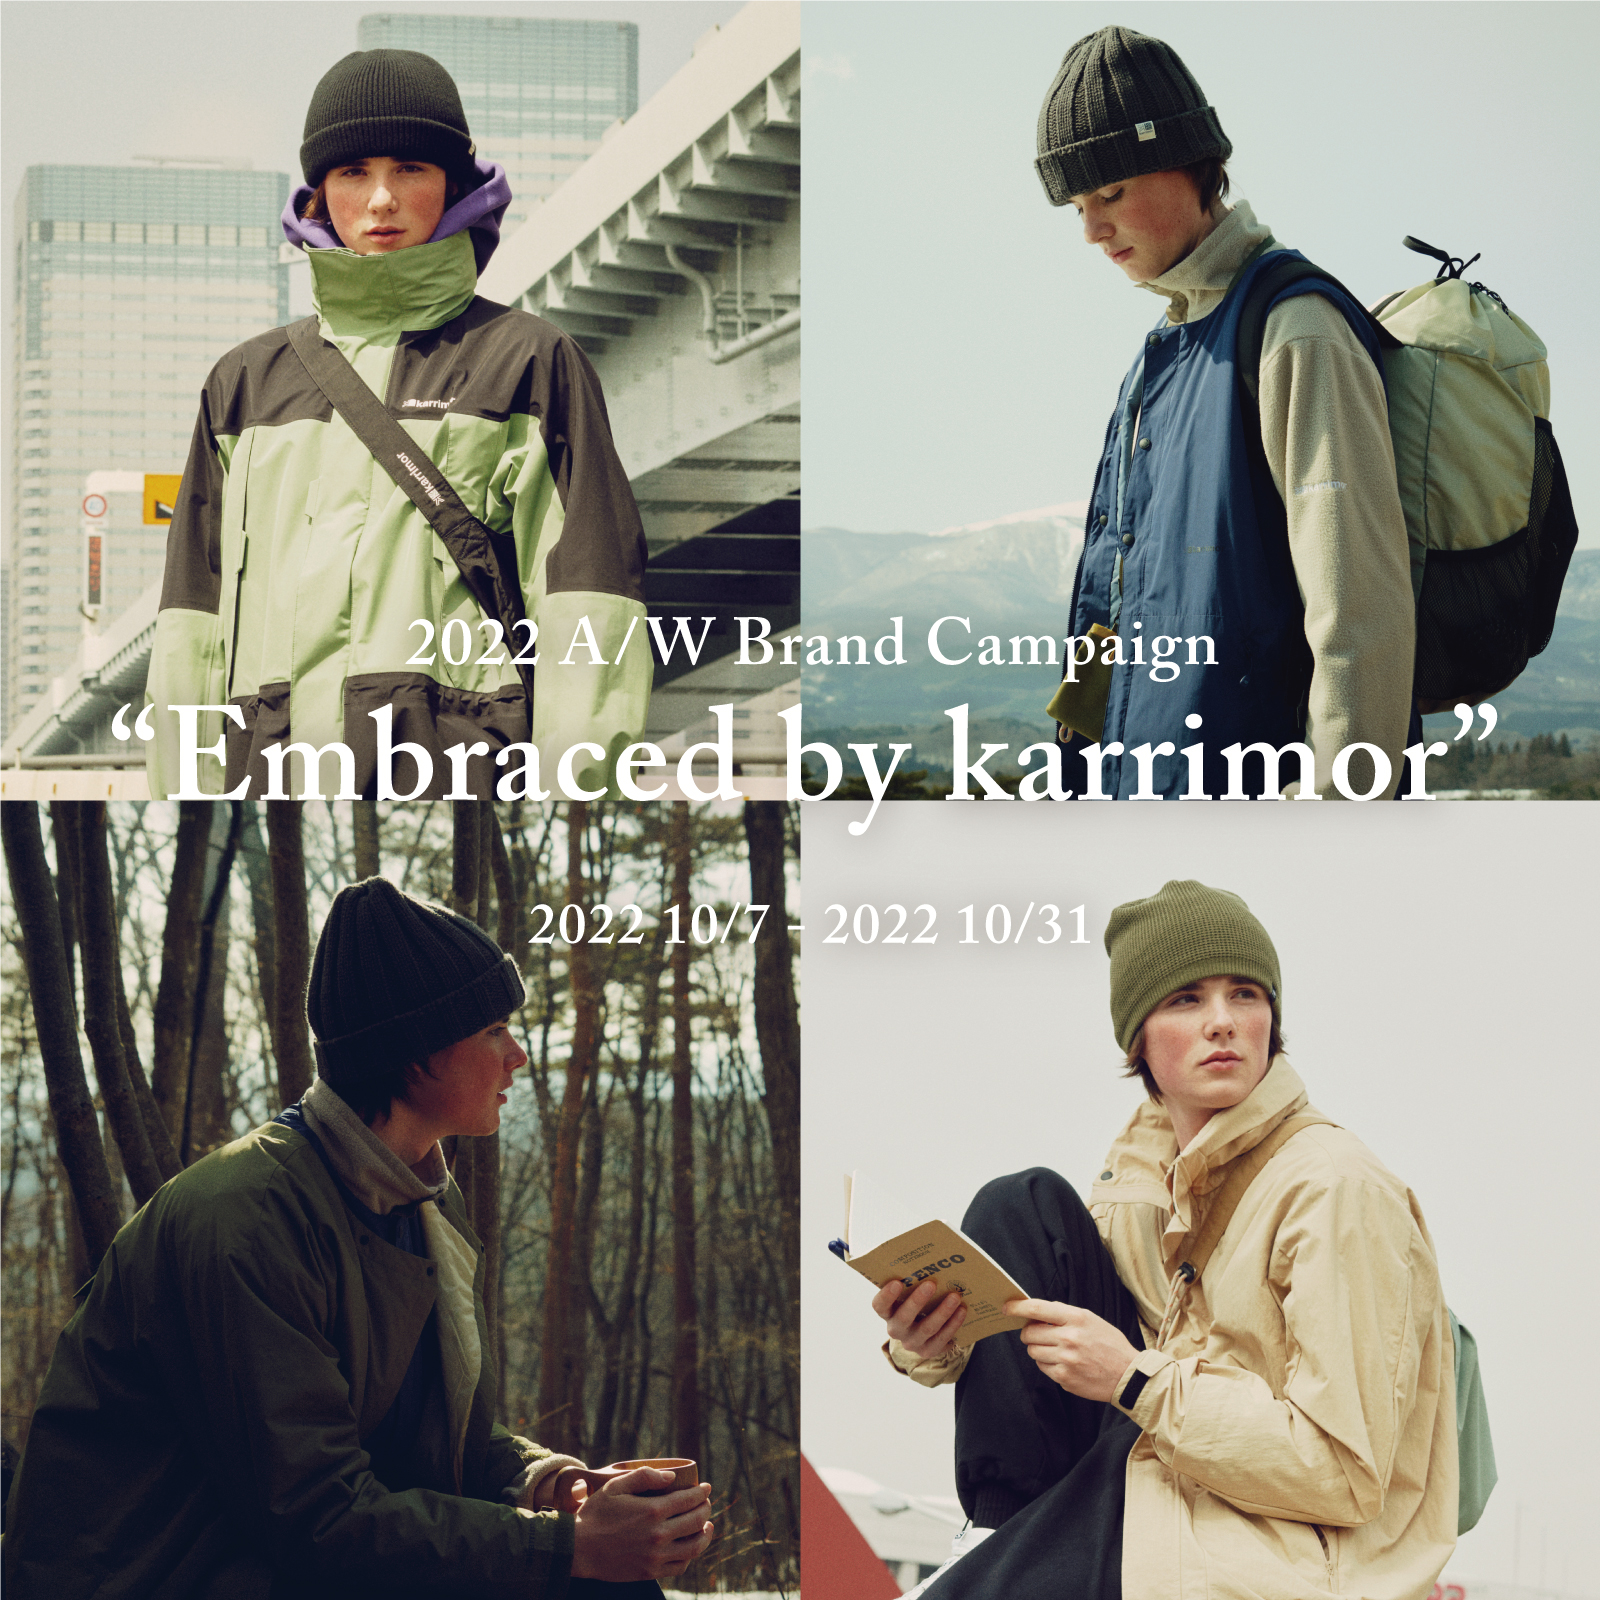 2022A/W Brand Campaign“Embraced by karrimor”